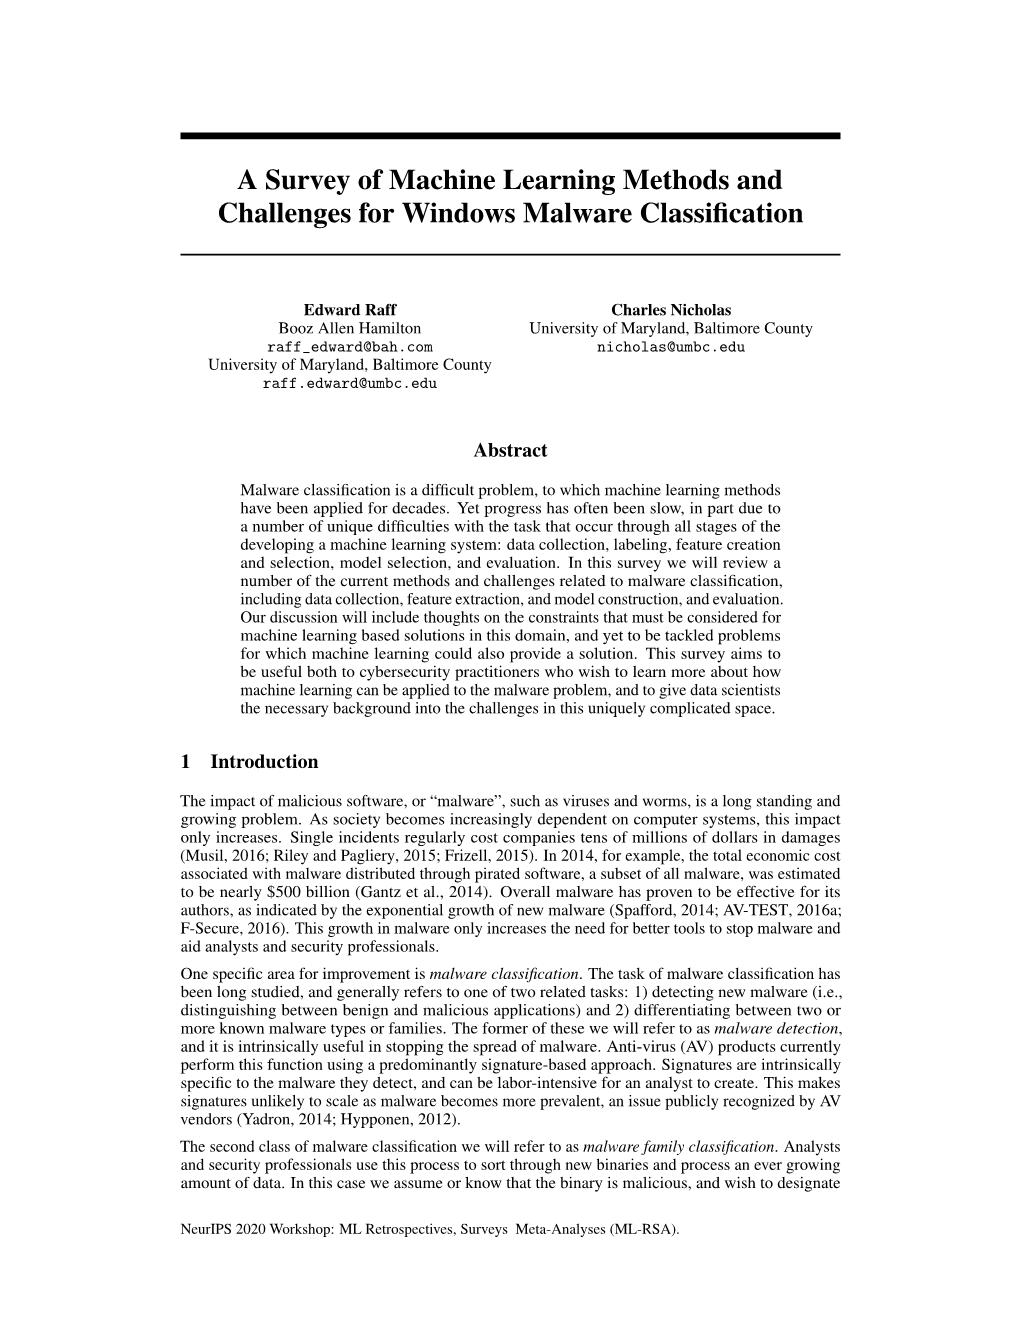 A Survey of Machine Learning Methods and Challenges for Windows Malware Classiﬁcation